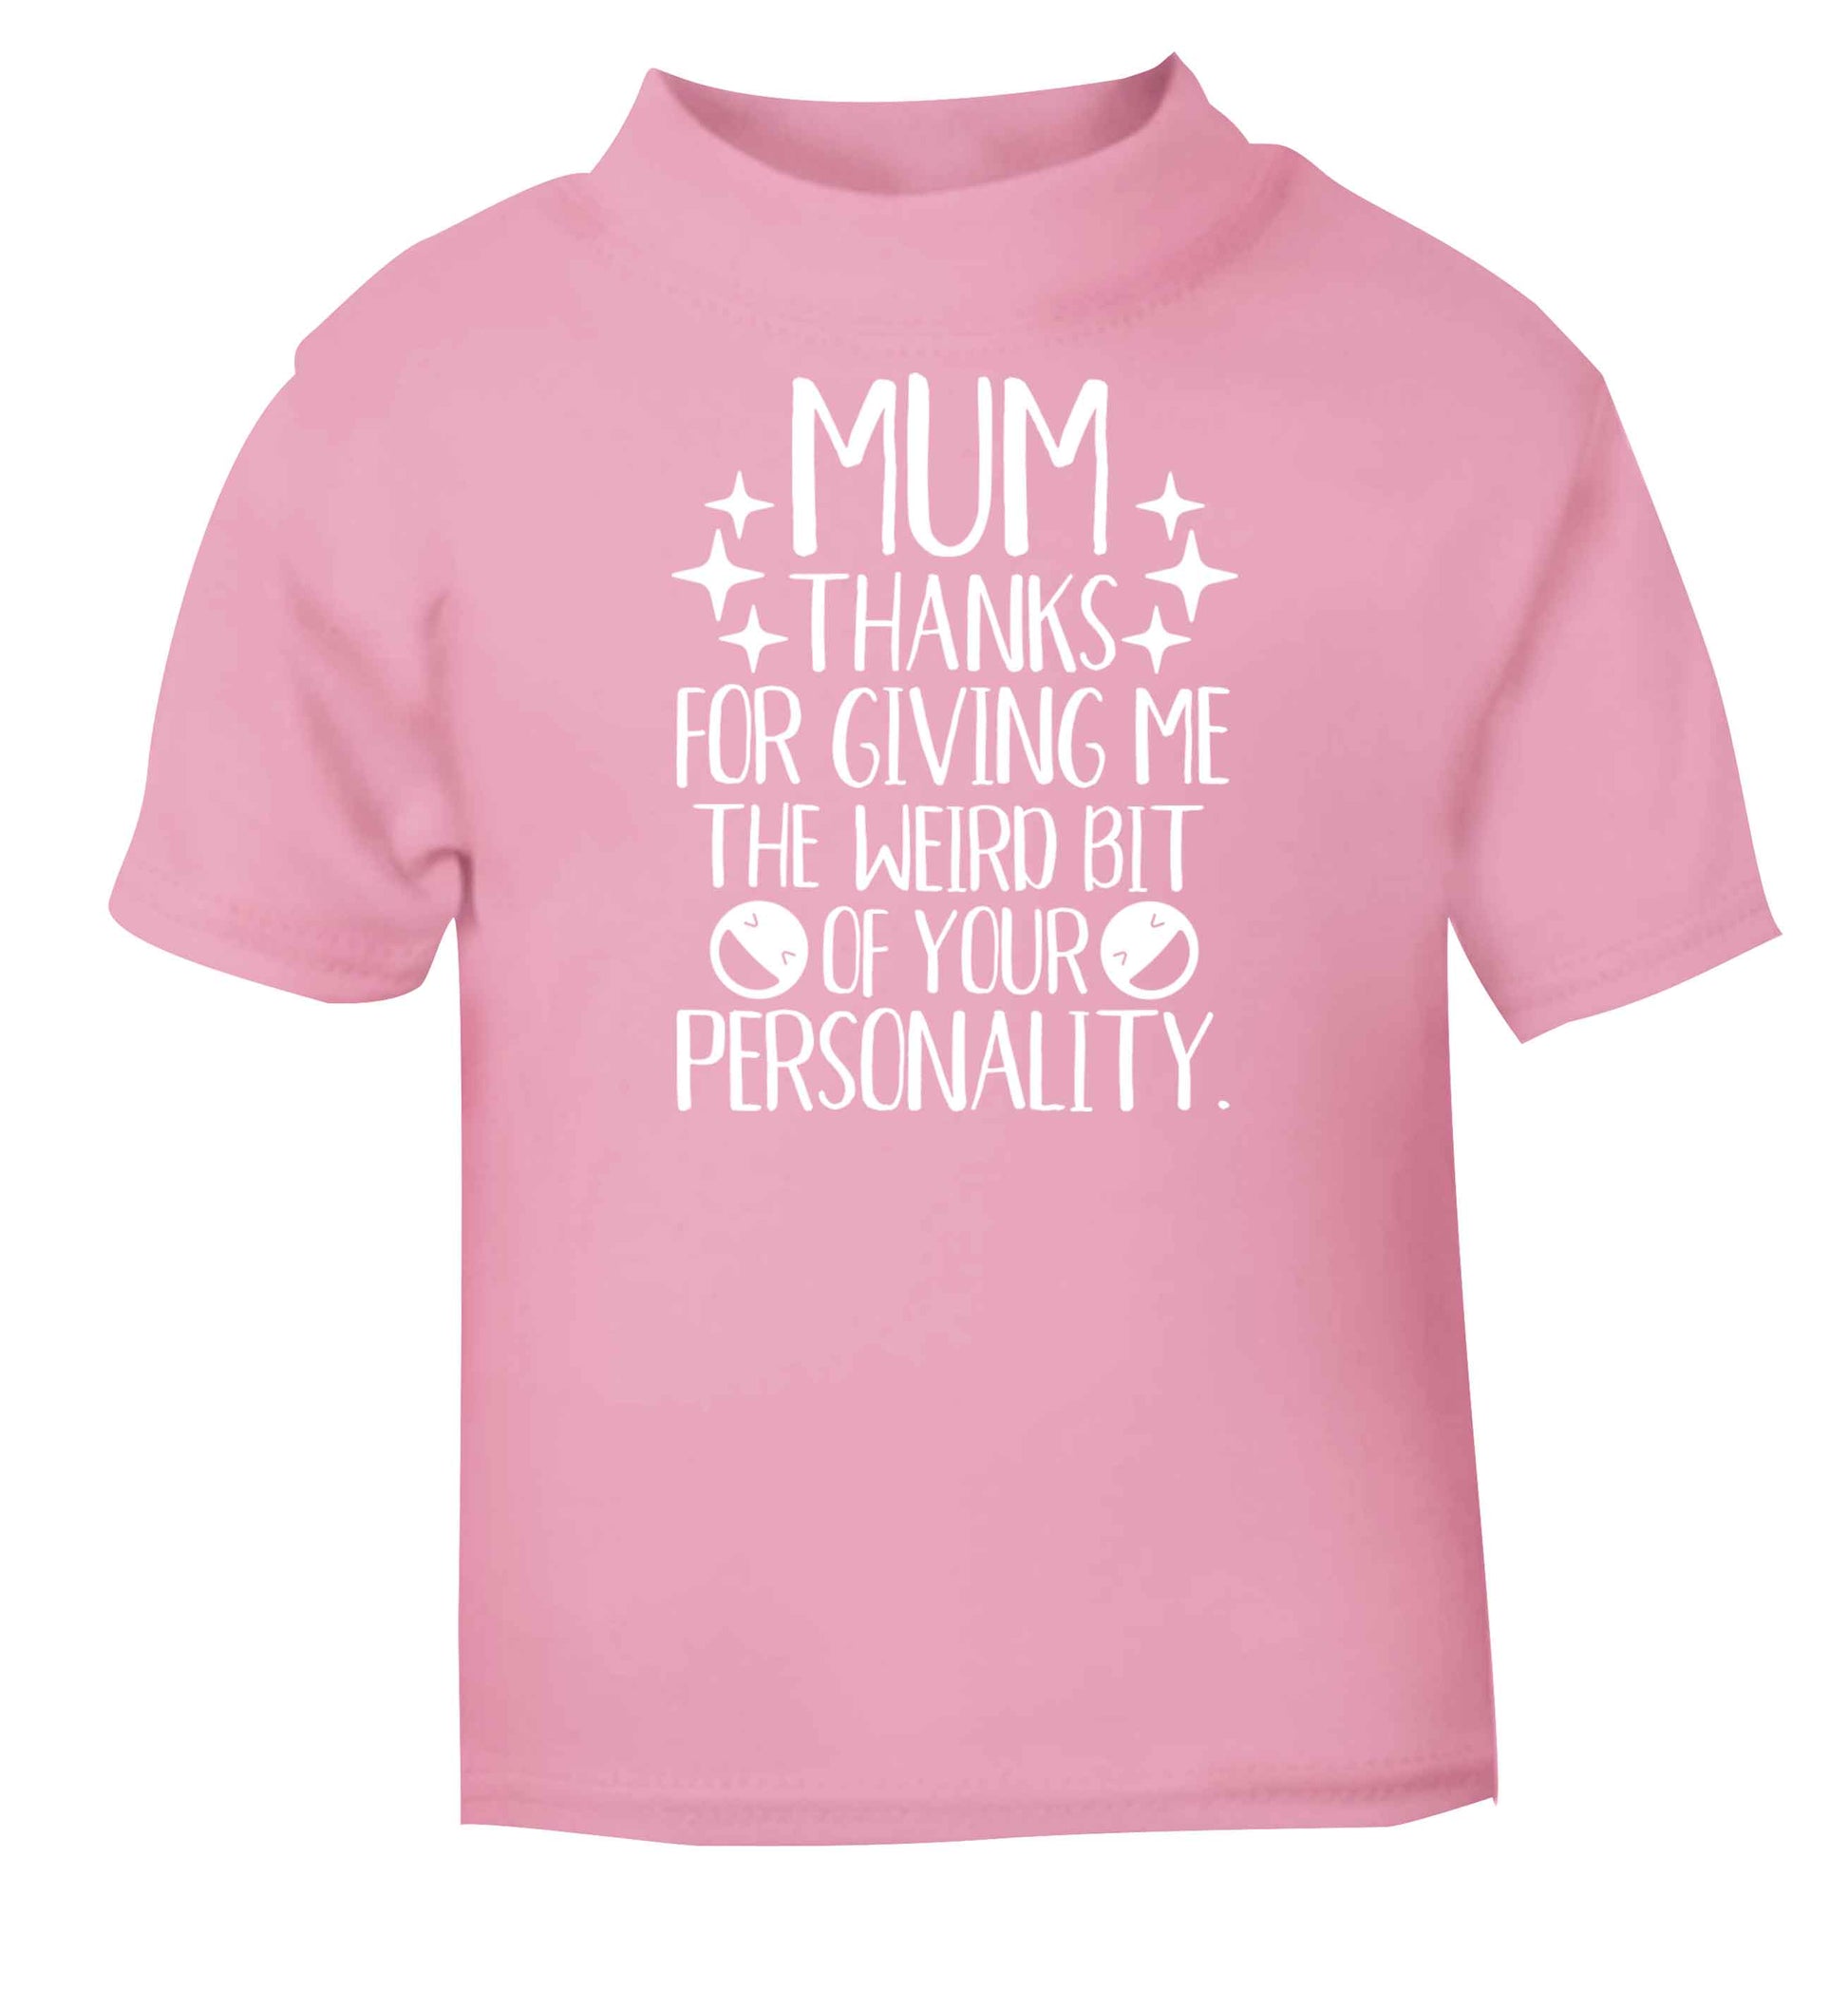 Mum, I love you more than halloumi and if you know me at all you know how deep that is light pink baby toddler Tshirt 2 Years